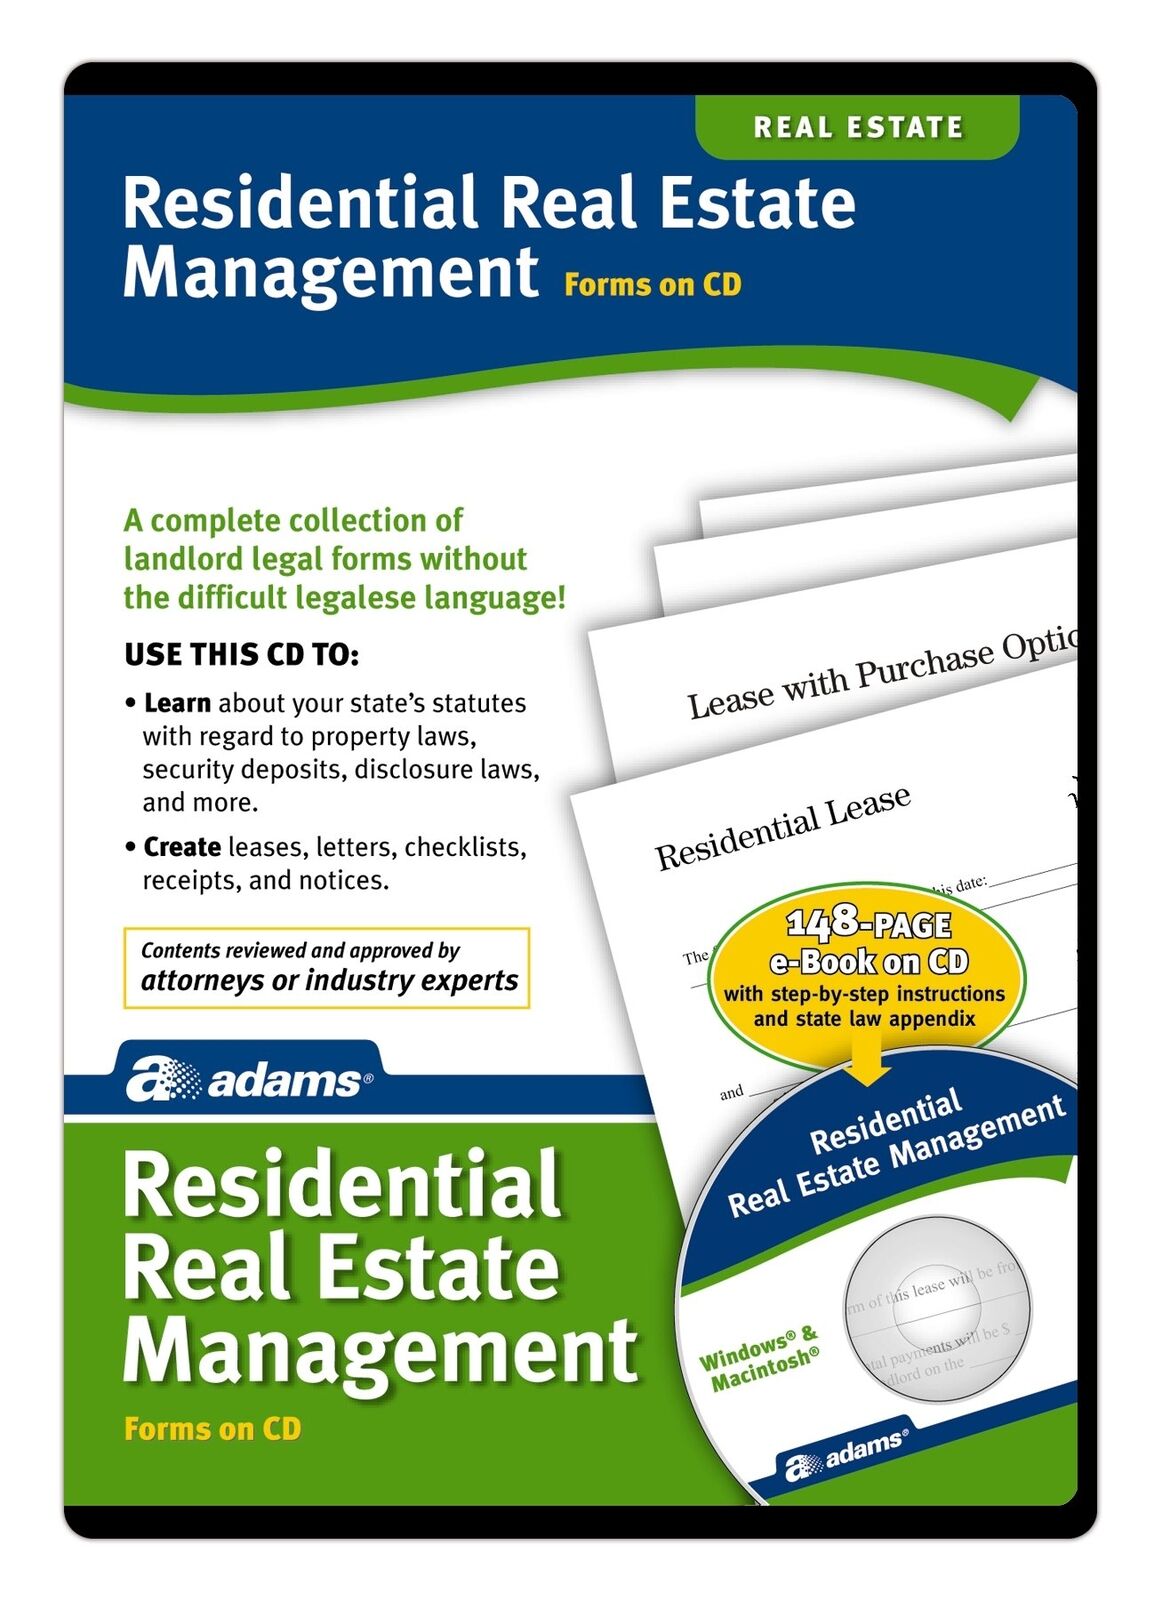 Adams Residential Property Management, Forms on CD (SS505)